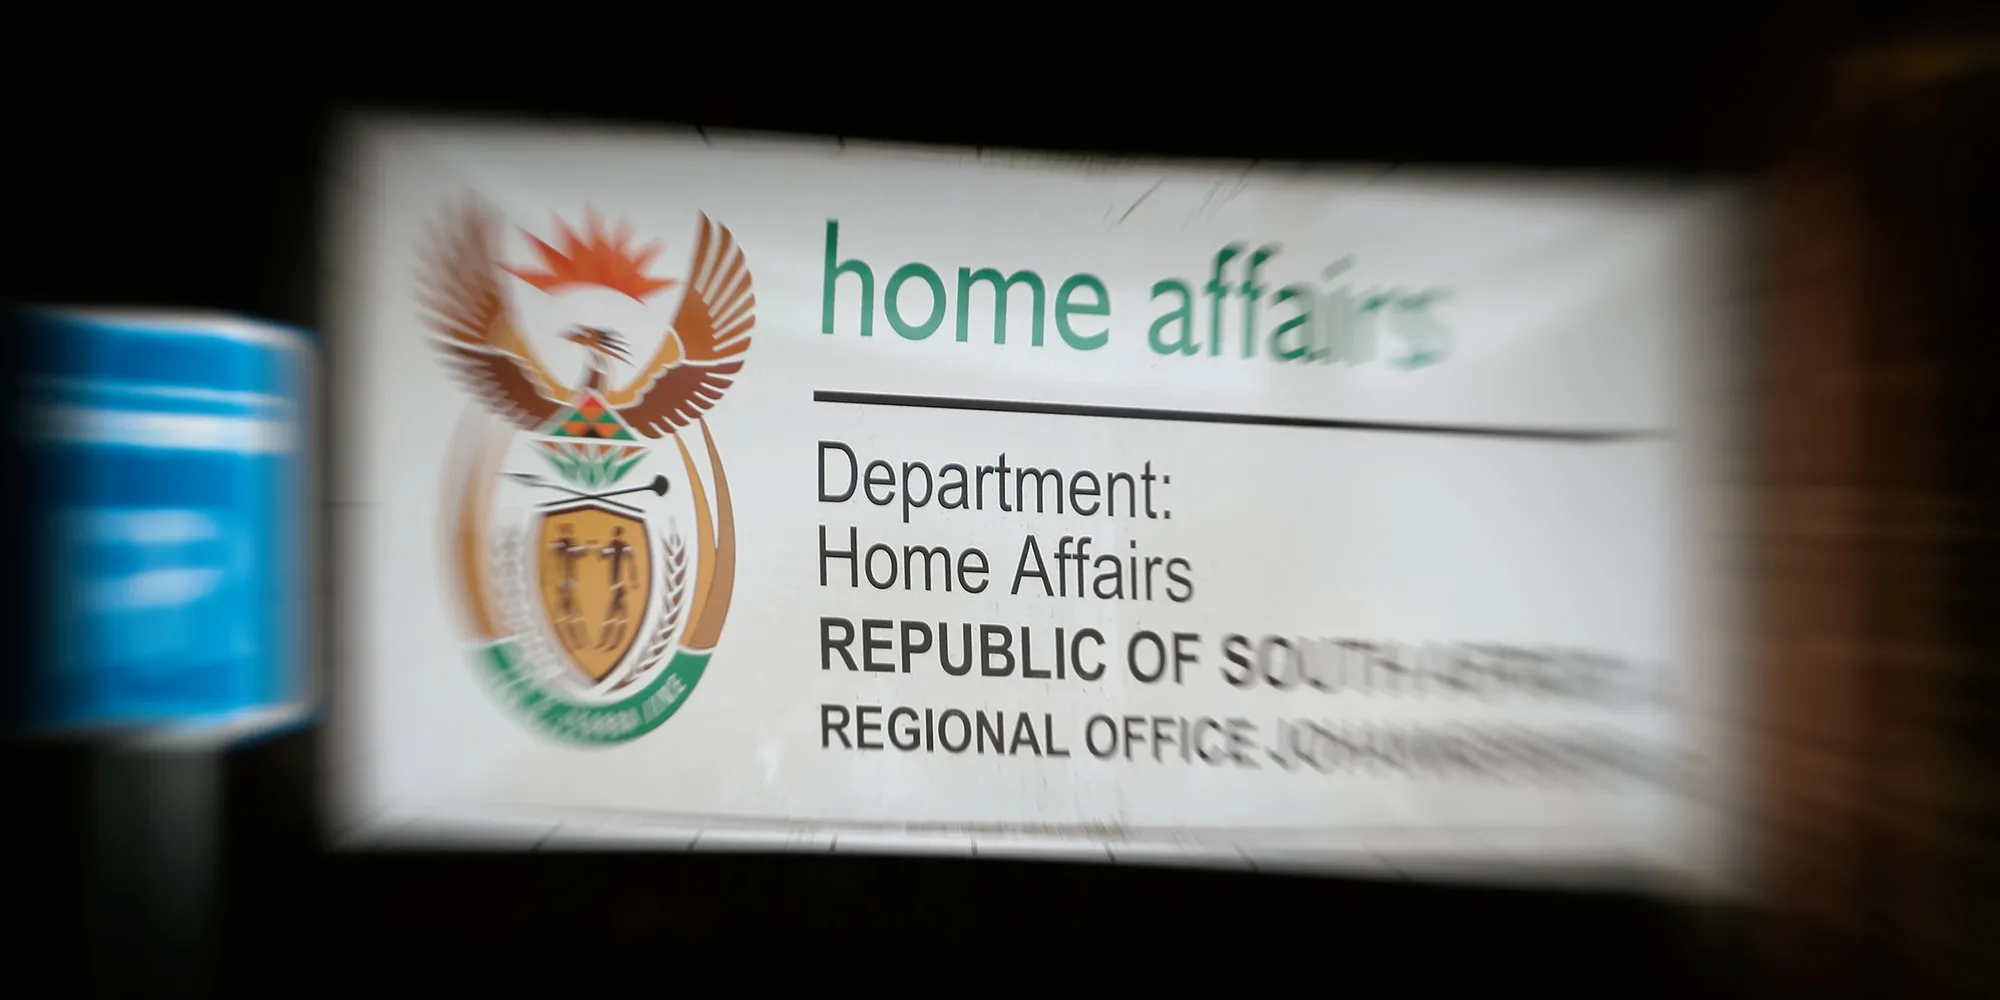 Ghost in the system — Lawyers for Human Rights in legal battle with Home Affairs over 10-year limbo identity document case, Home Affairs